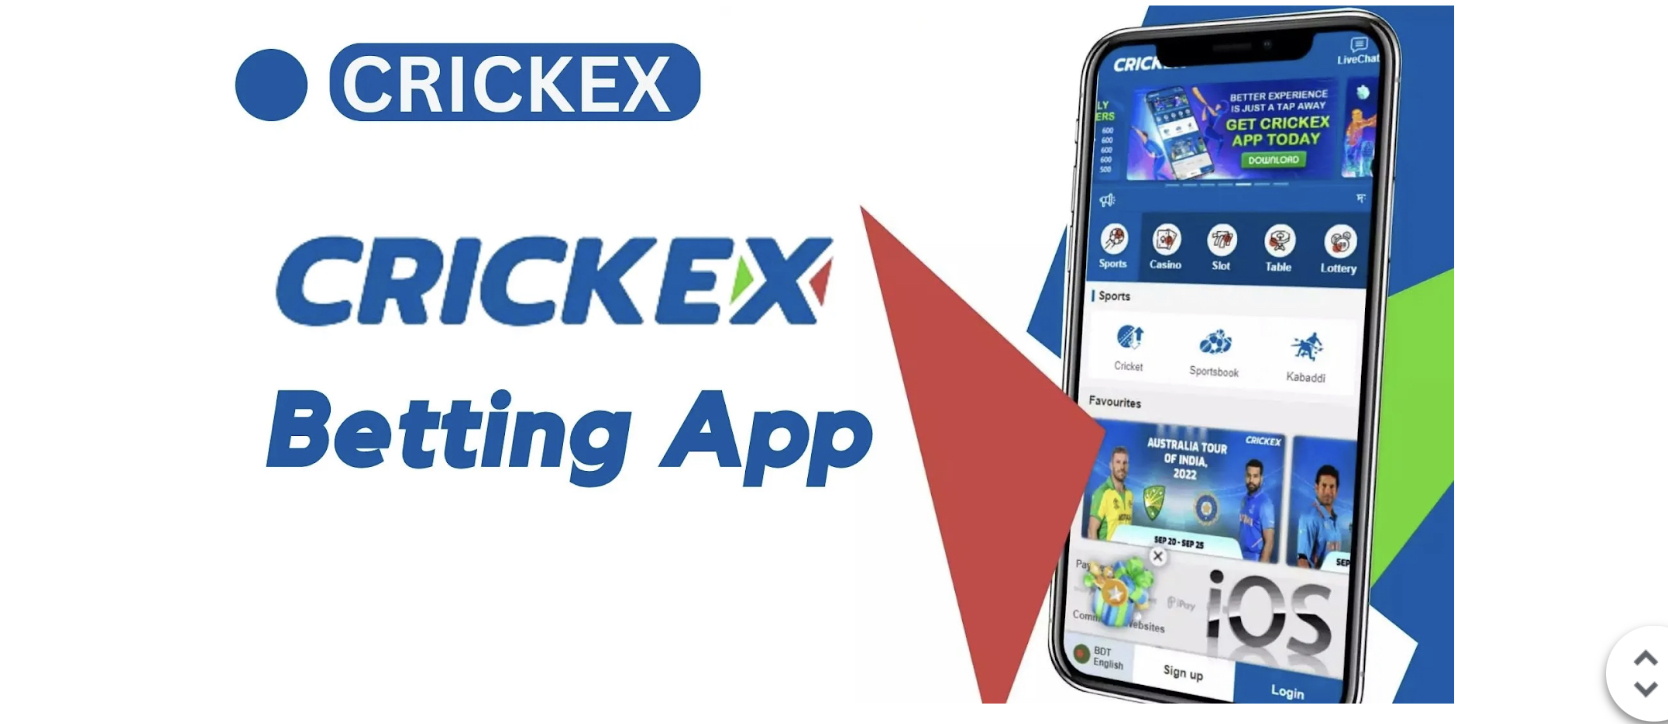 Crickex Review – A Look at Bangladesh's Leading Bookmaker's Features and Responsible Gaming Tools.